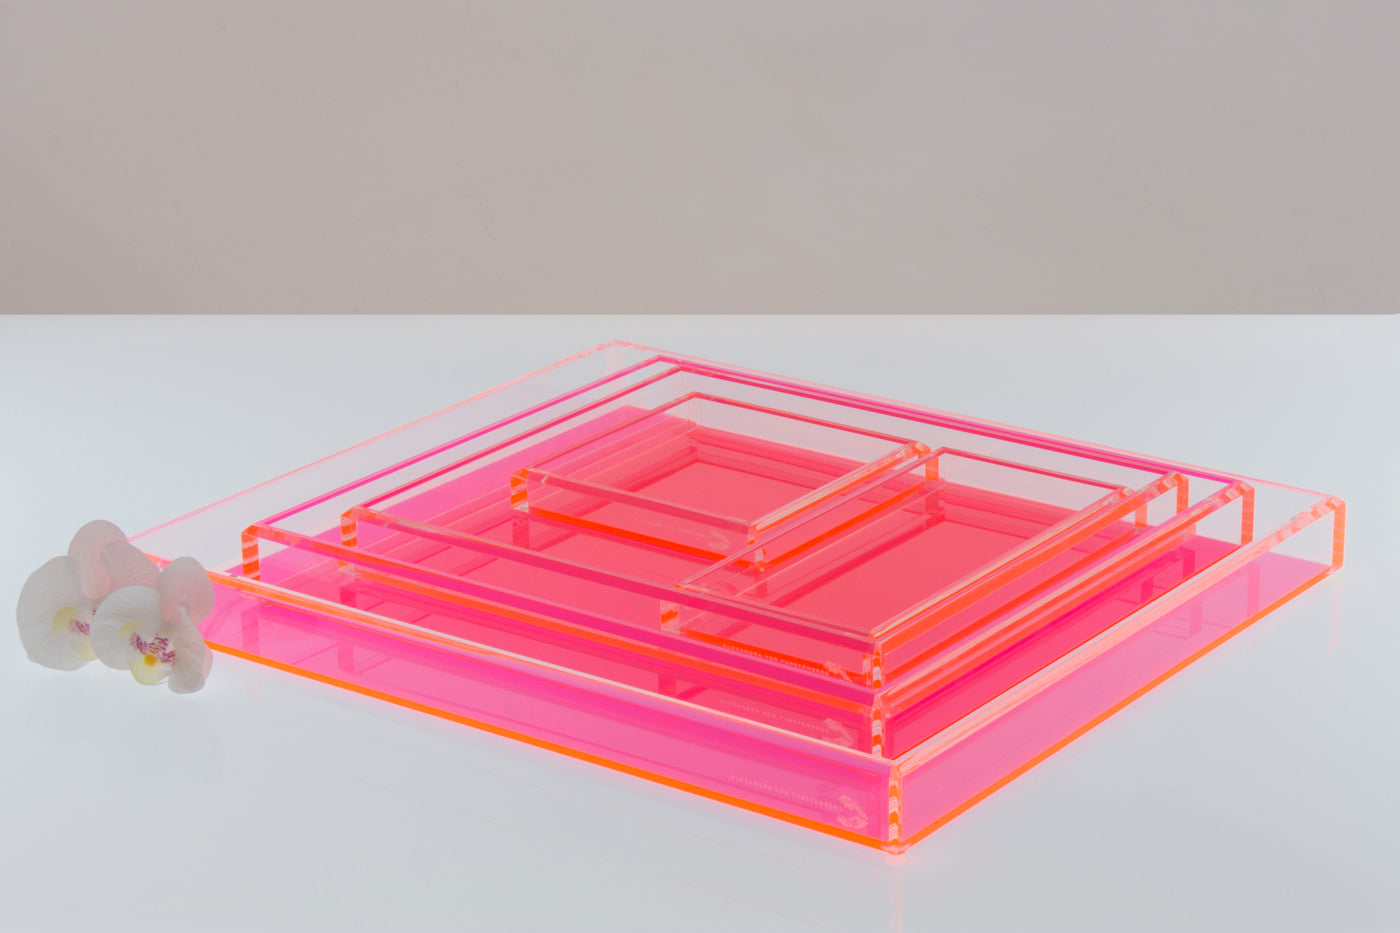 Square Tray in Pink